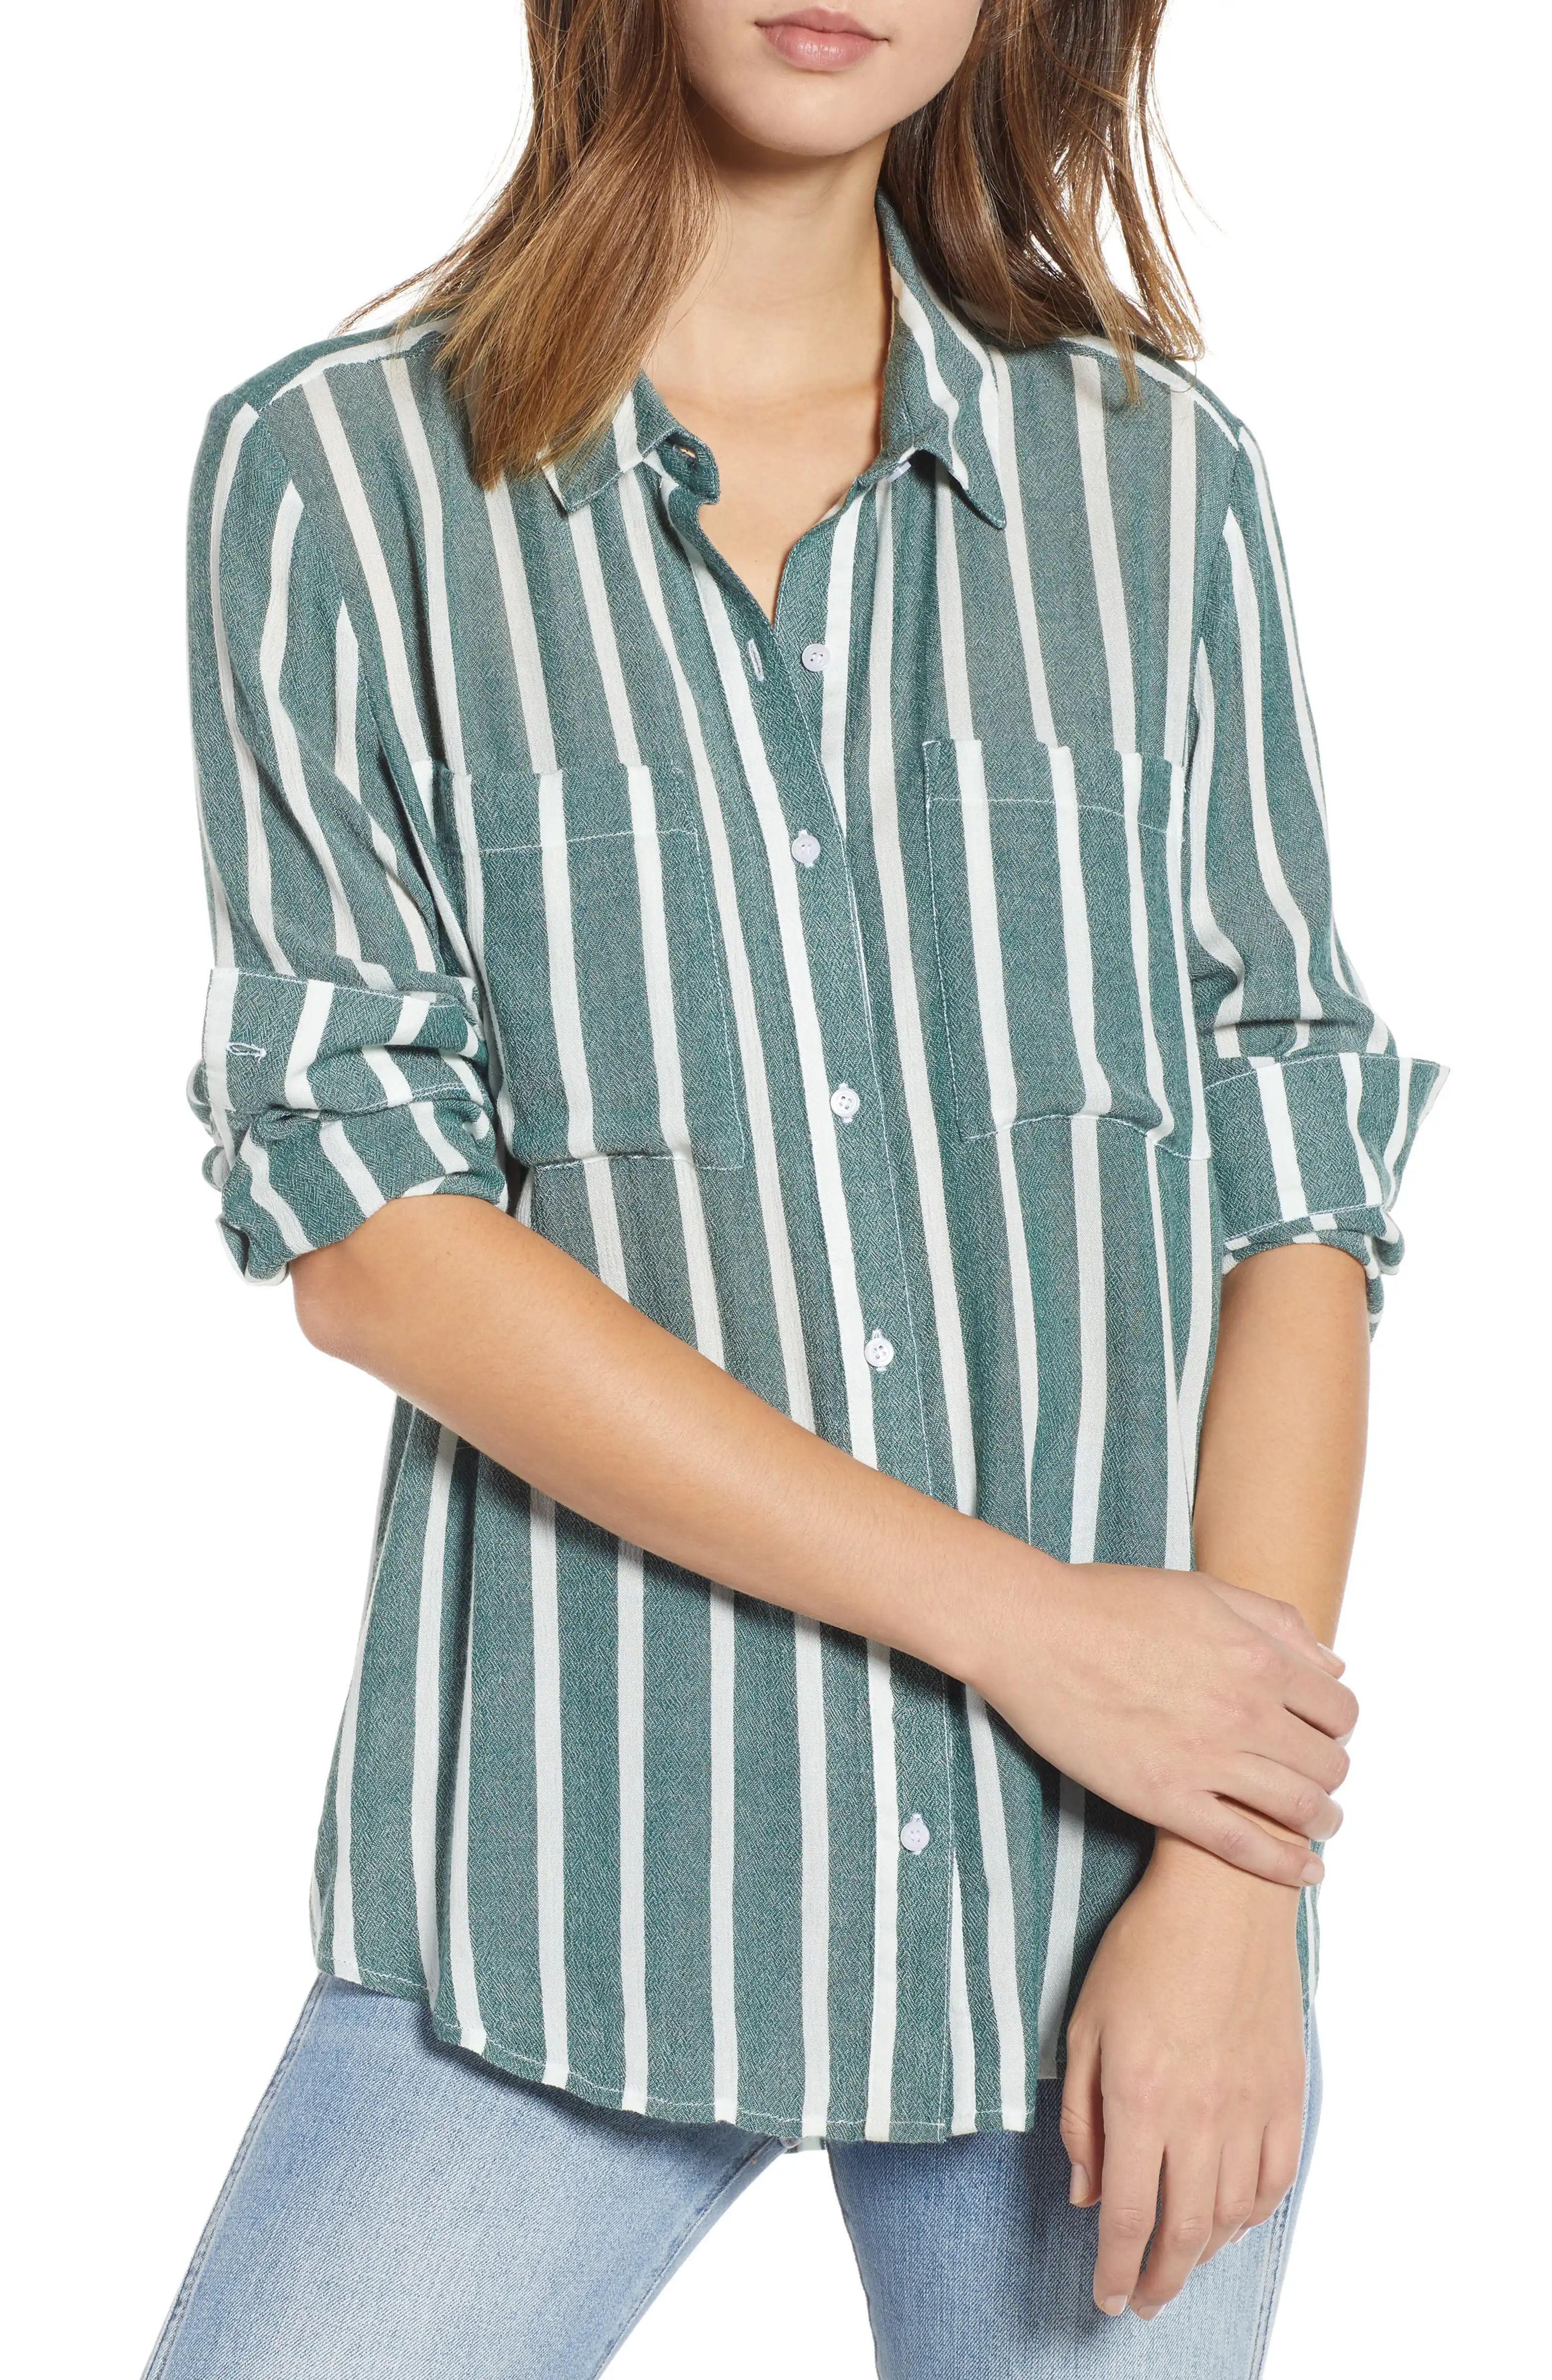 The Perfect Shirt | Nordstrom